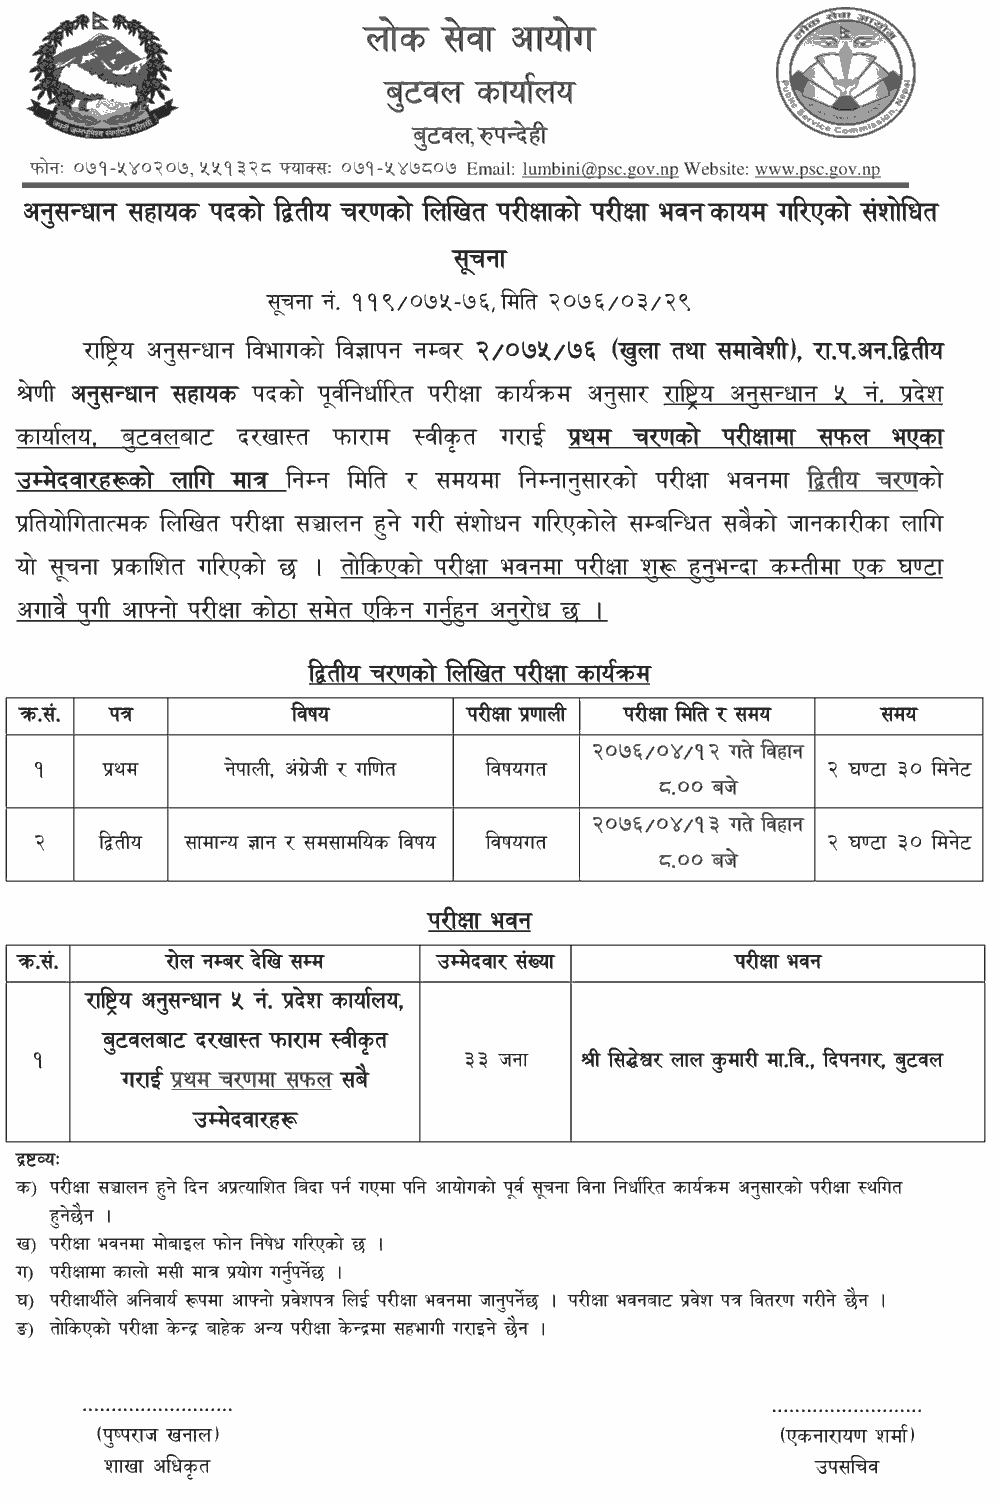 Investigation Assistant Second Phase Butwal Exam Center